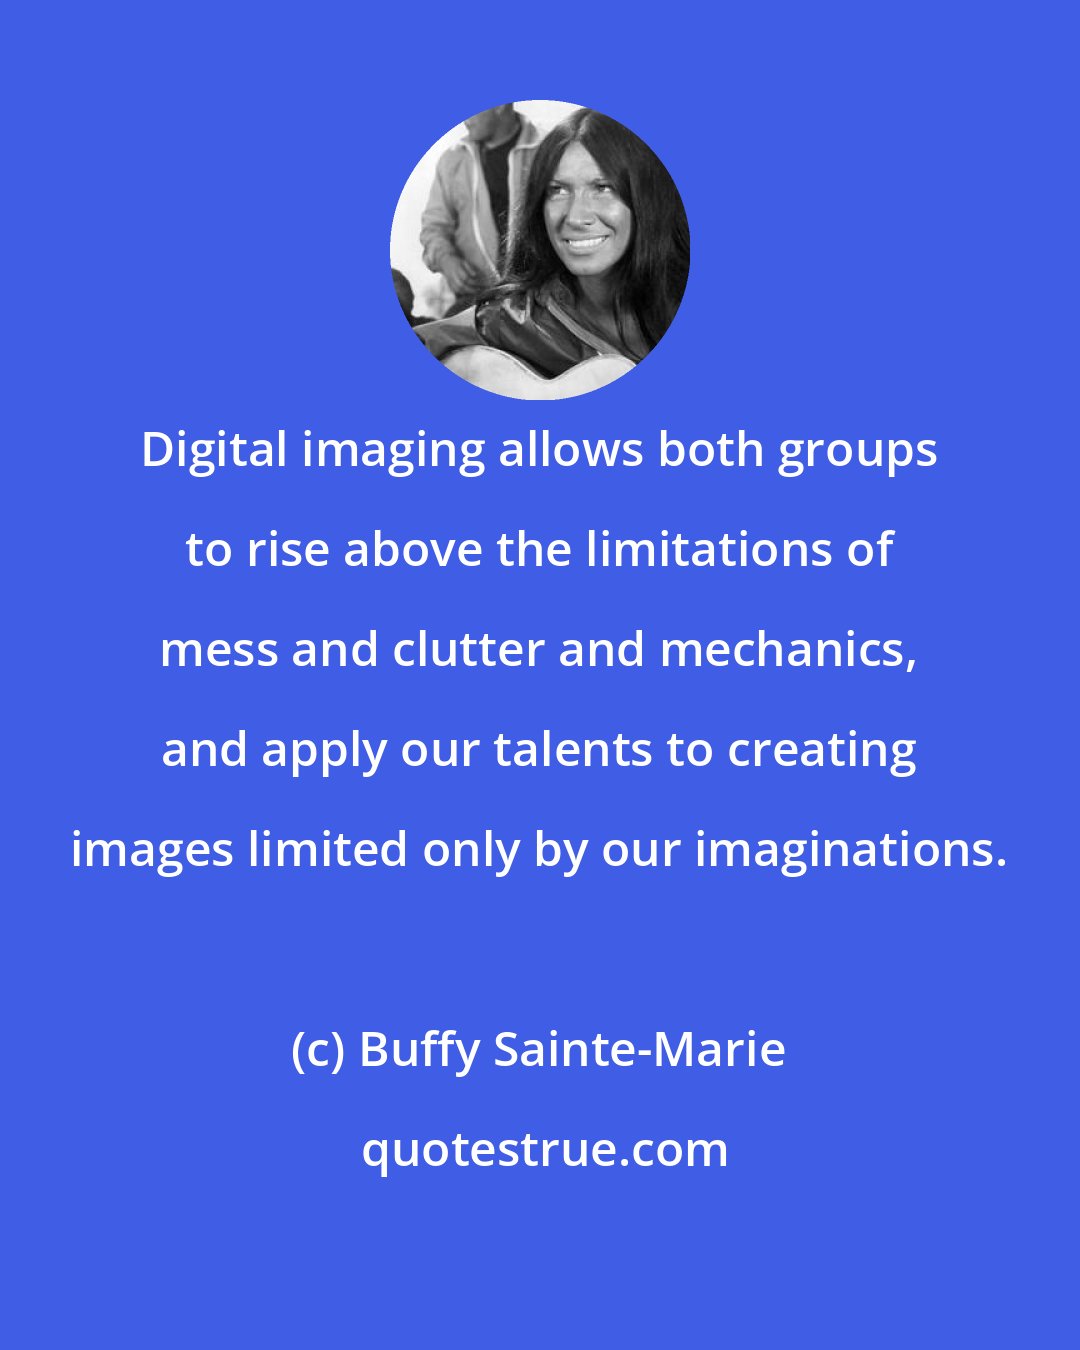 Buffy Sainte-Marie: Digital imaging allows both groups to rise above the limitations of mess and clutter and mechanics, and apply our talents to creating images limited only by our imaginations.